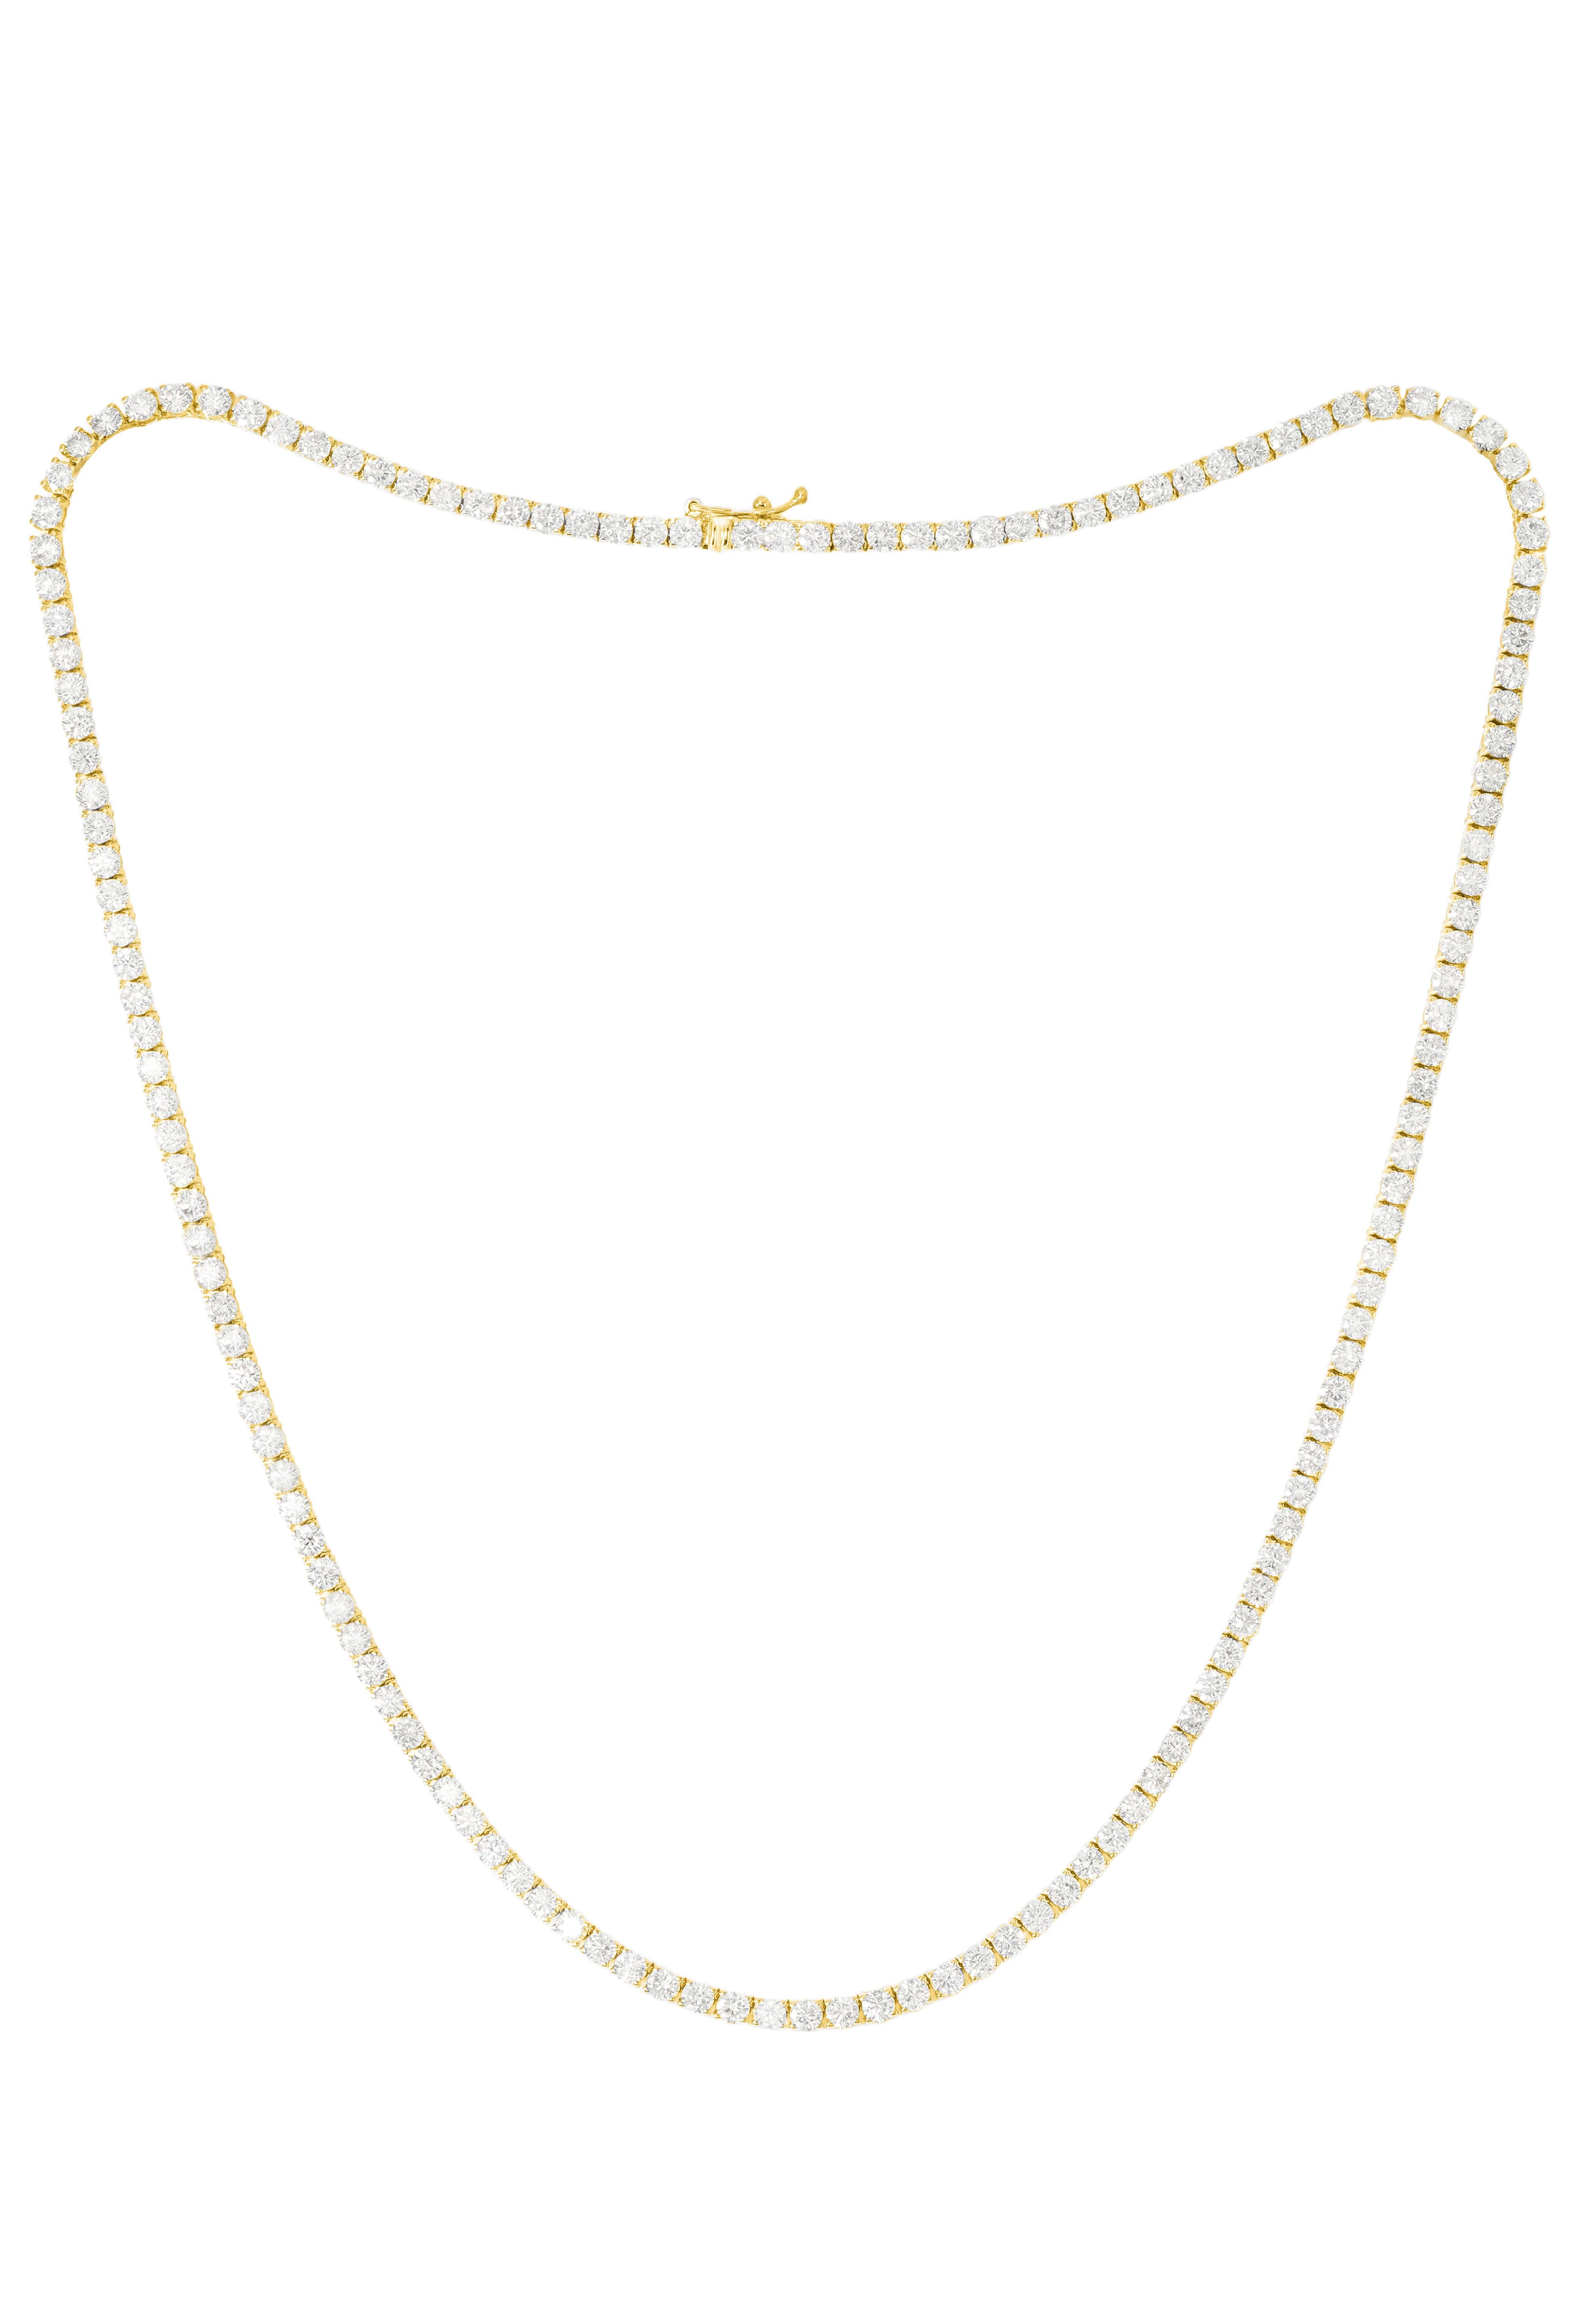 14K Yellow Gold Diamond Straight Line Tennis Necklace Features 12.25Cts of Diamonds, 144St. Diana M. is a leading supplier of top-quality fine jewelry for over 35 years.
Diana M is one-stop shop for all your jewelry shopping, carrying line of